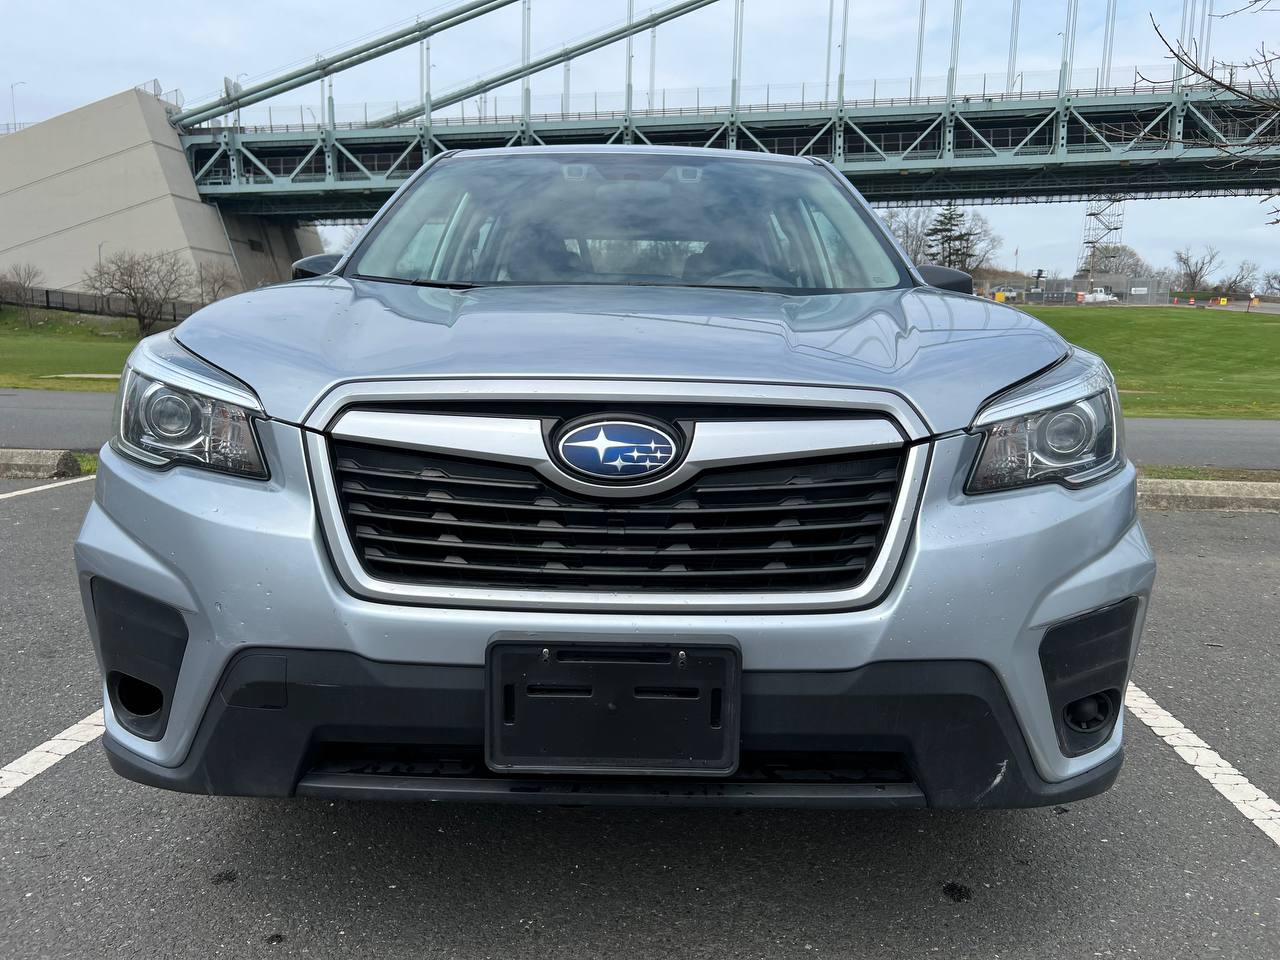 Used - Subaru Forester Base AWD Wagon for sale in Staten Island NY